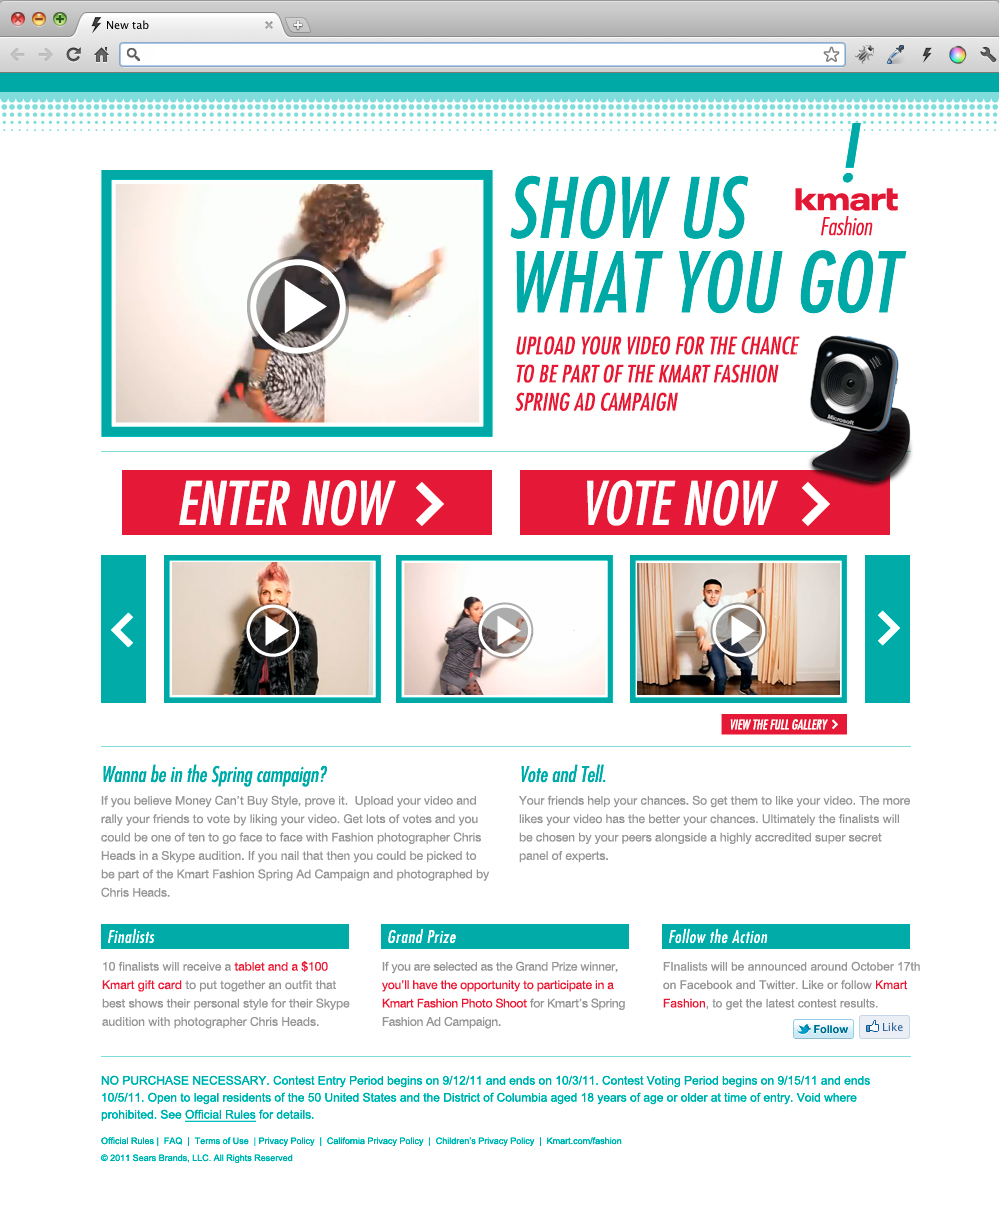 Kmart, Money Can't Buy Style, contest website